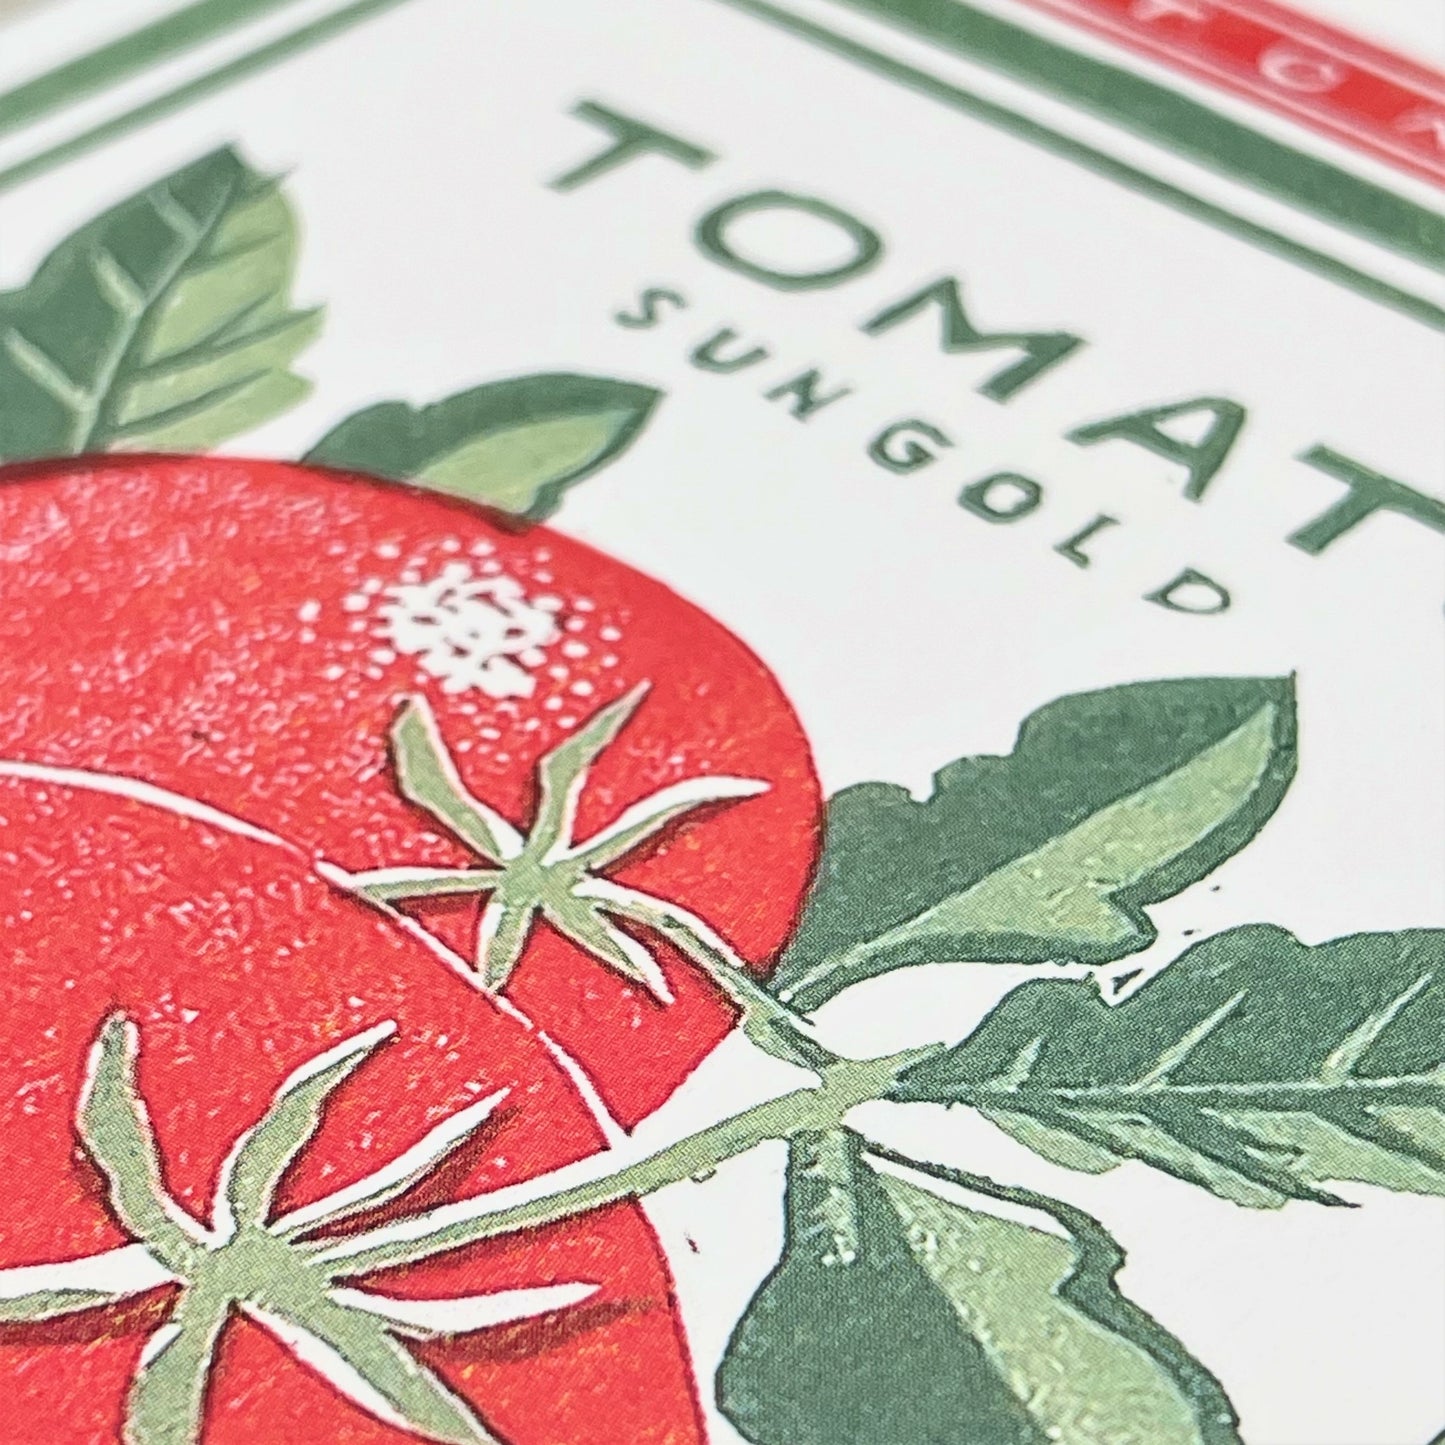 greetings card of a green and red vintage packet of tomato seeds, close up of the card